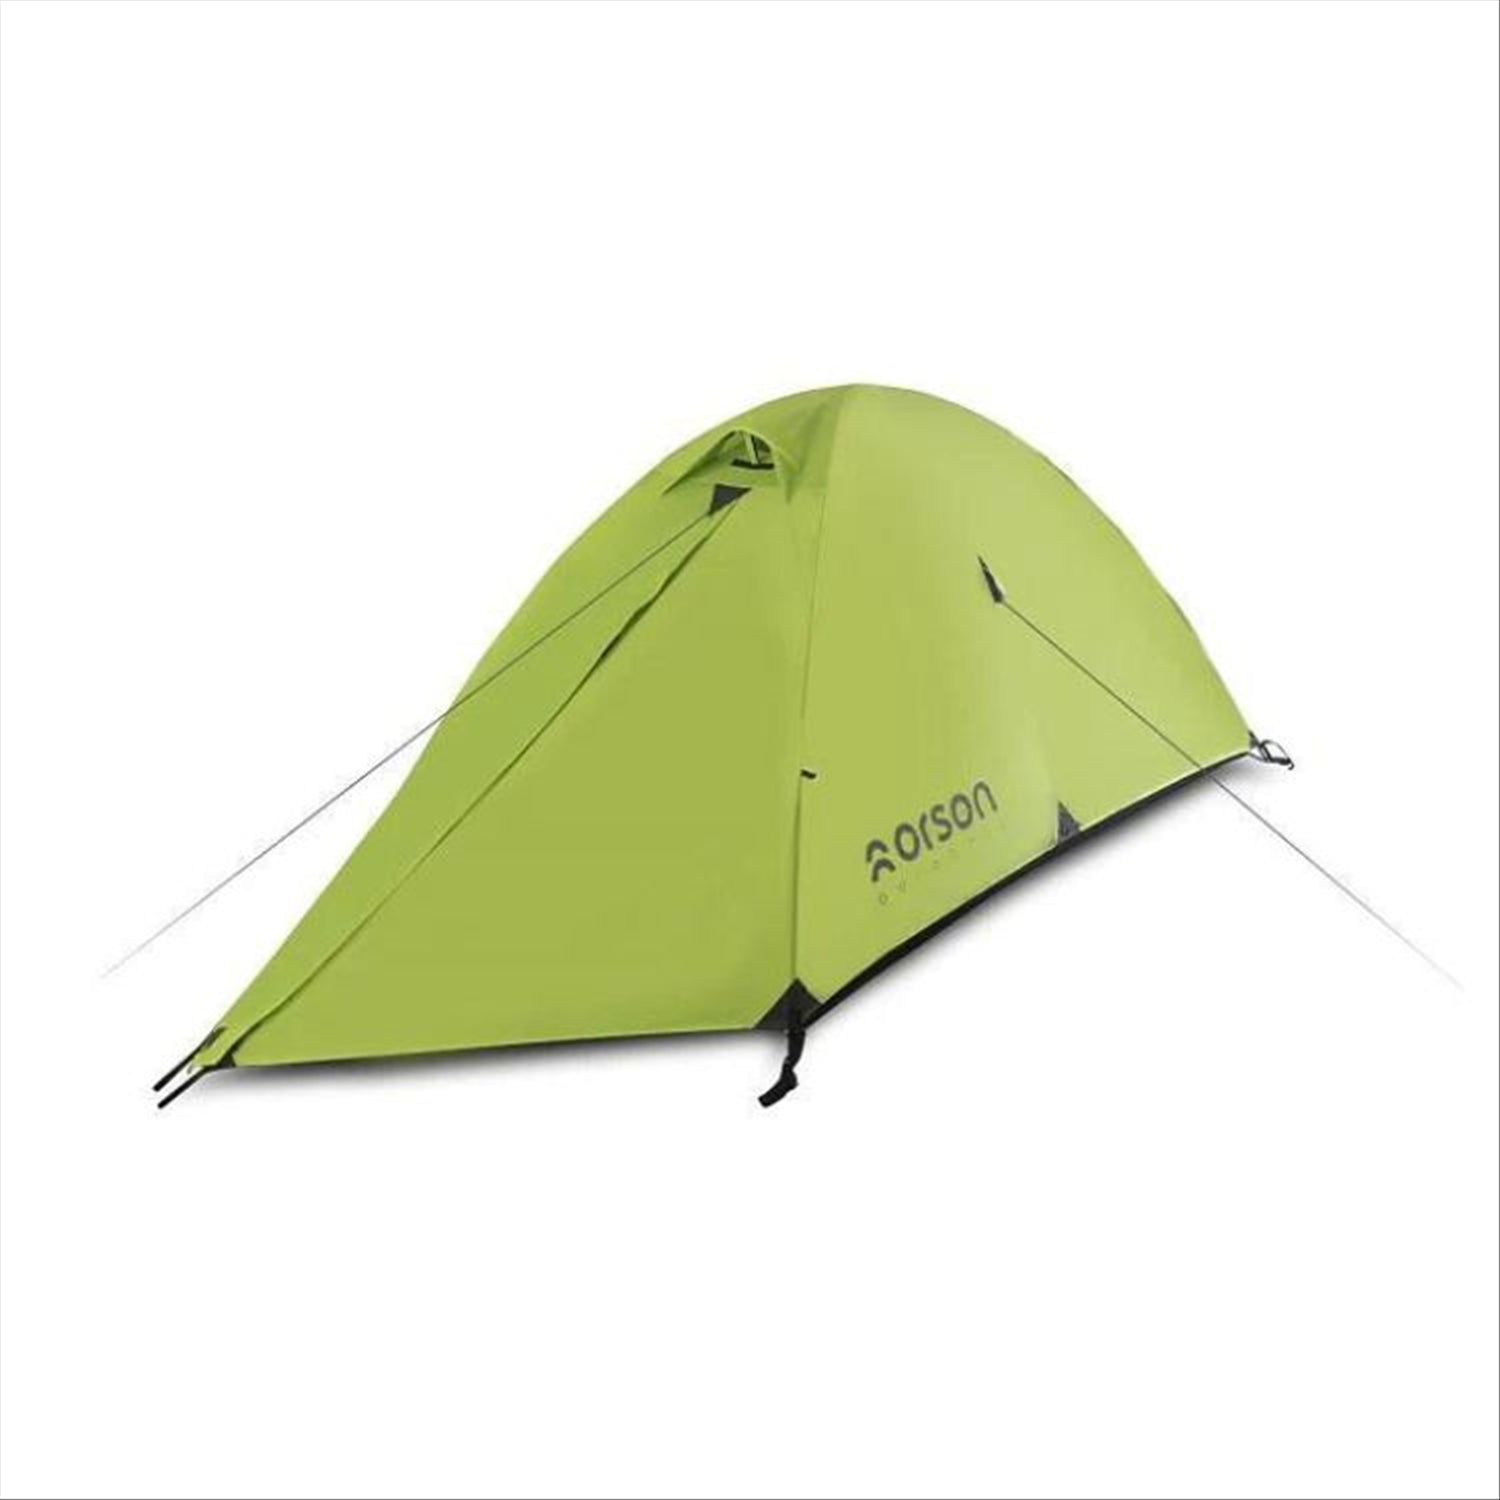 Intents Spirit 2 - 'All Weather Series' Lightweight 2 Person Tent 2.75kg